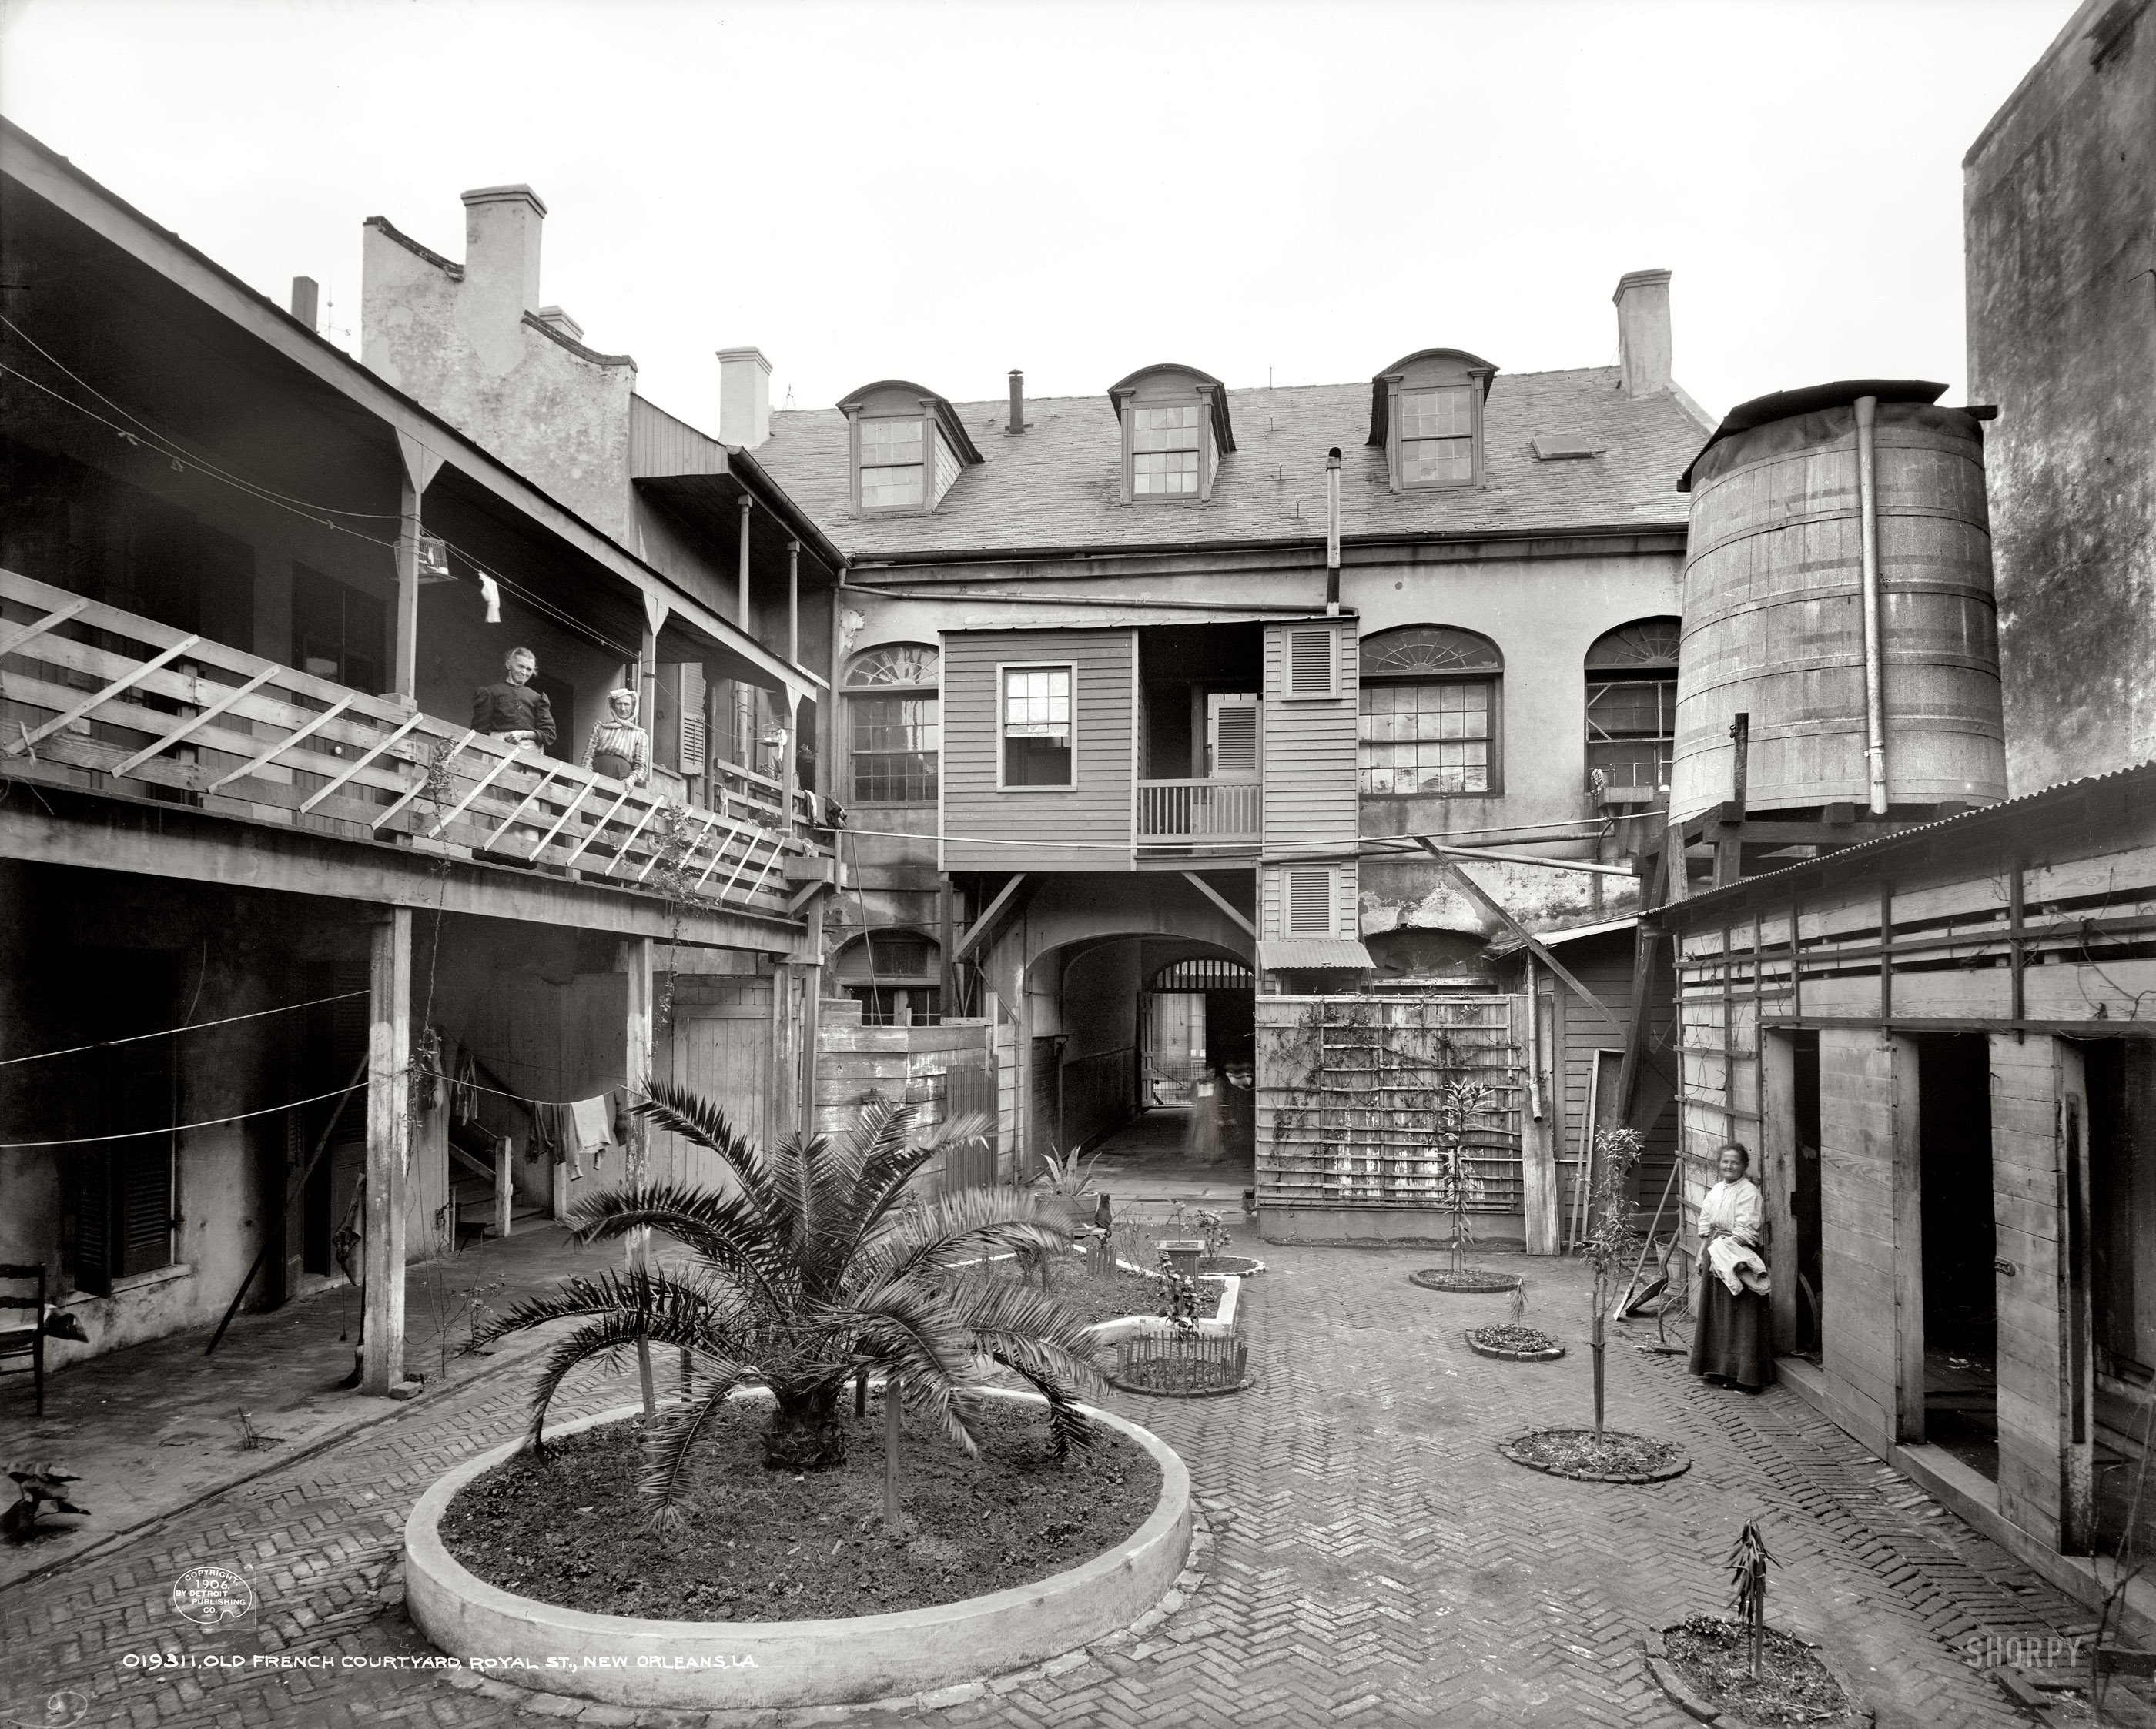 New Orleans, Louisiana, circa 1906. "Old French courtyard on Royal Street." 8x10 inch dry plate glass negative, Detroit Publishing Company. View full size.